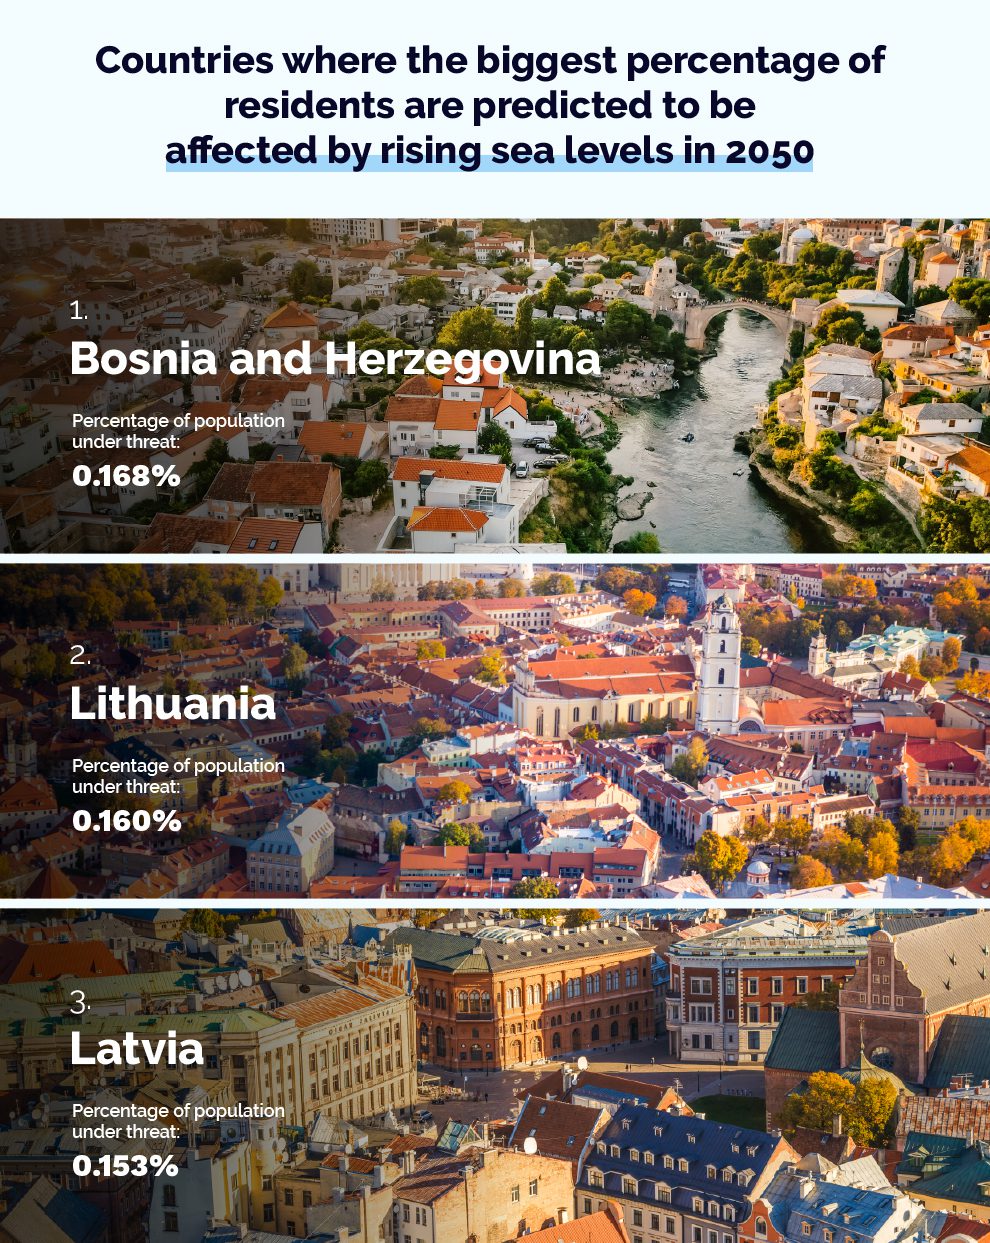 Countries where the biggest percentage of residents are predicted to be affected by rising sea levels in 2050